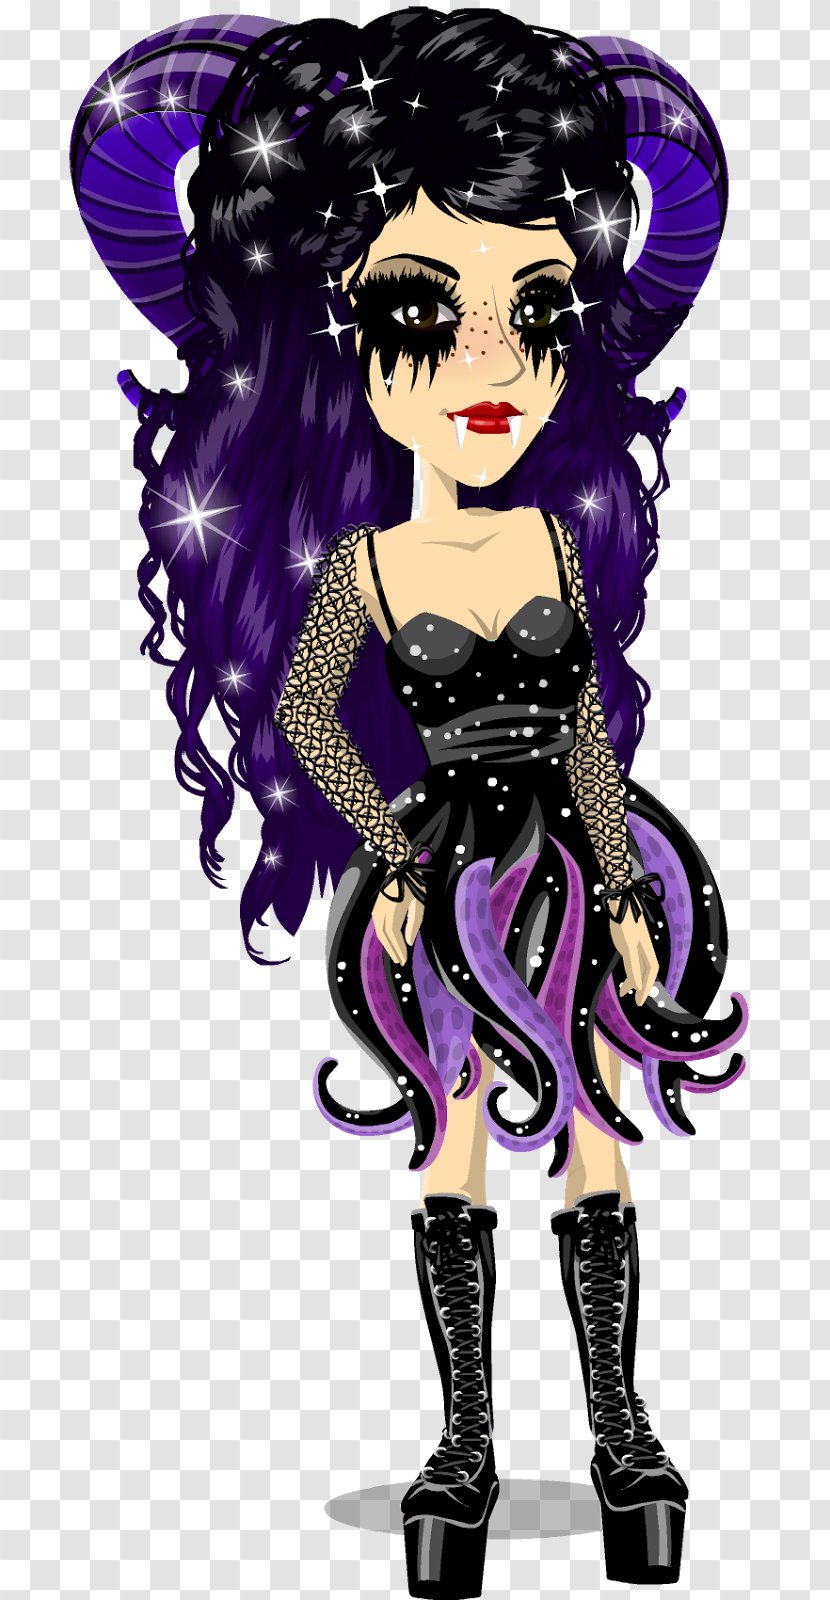 Black Hair Cartoon Doll - Mythical Creature - Happy 8 March Day Transparent PNG